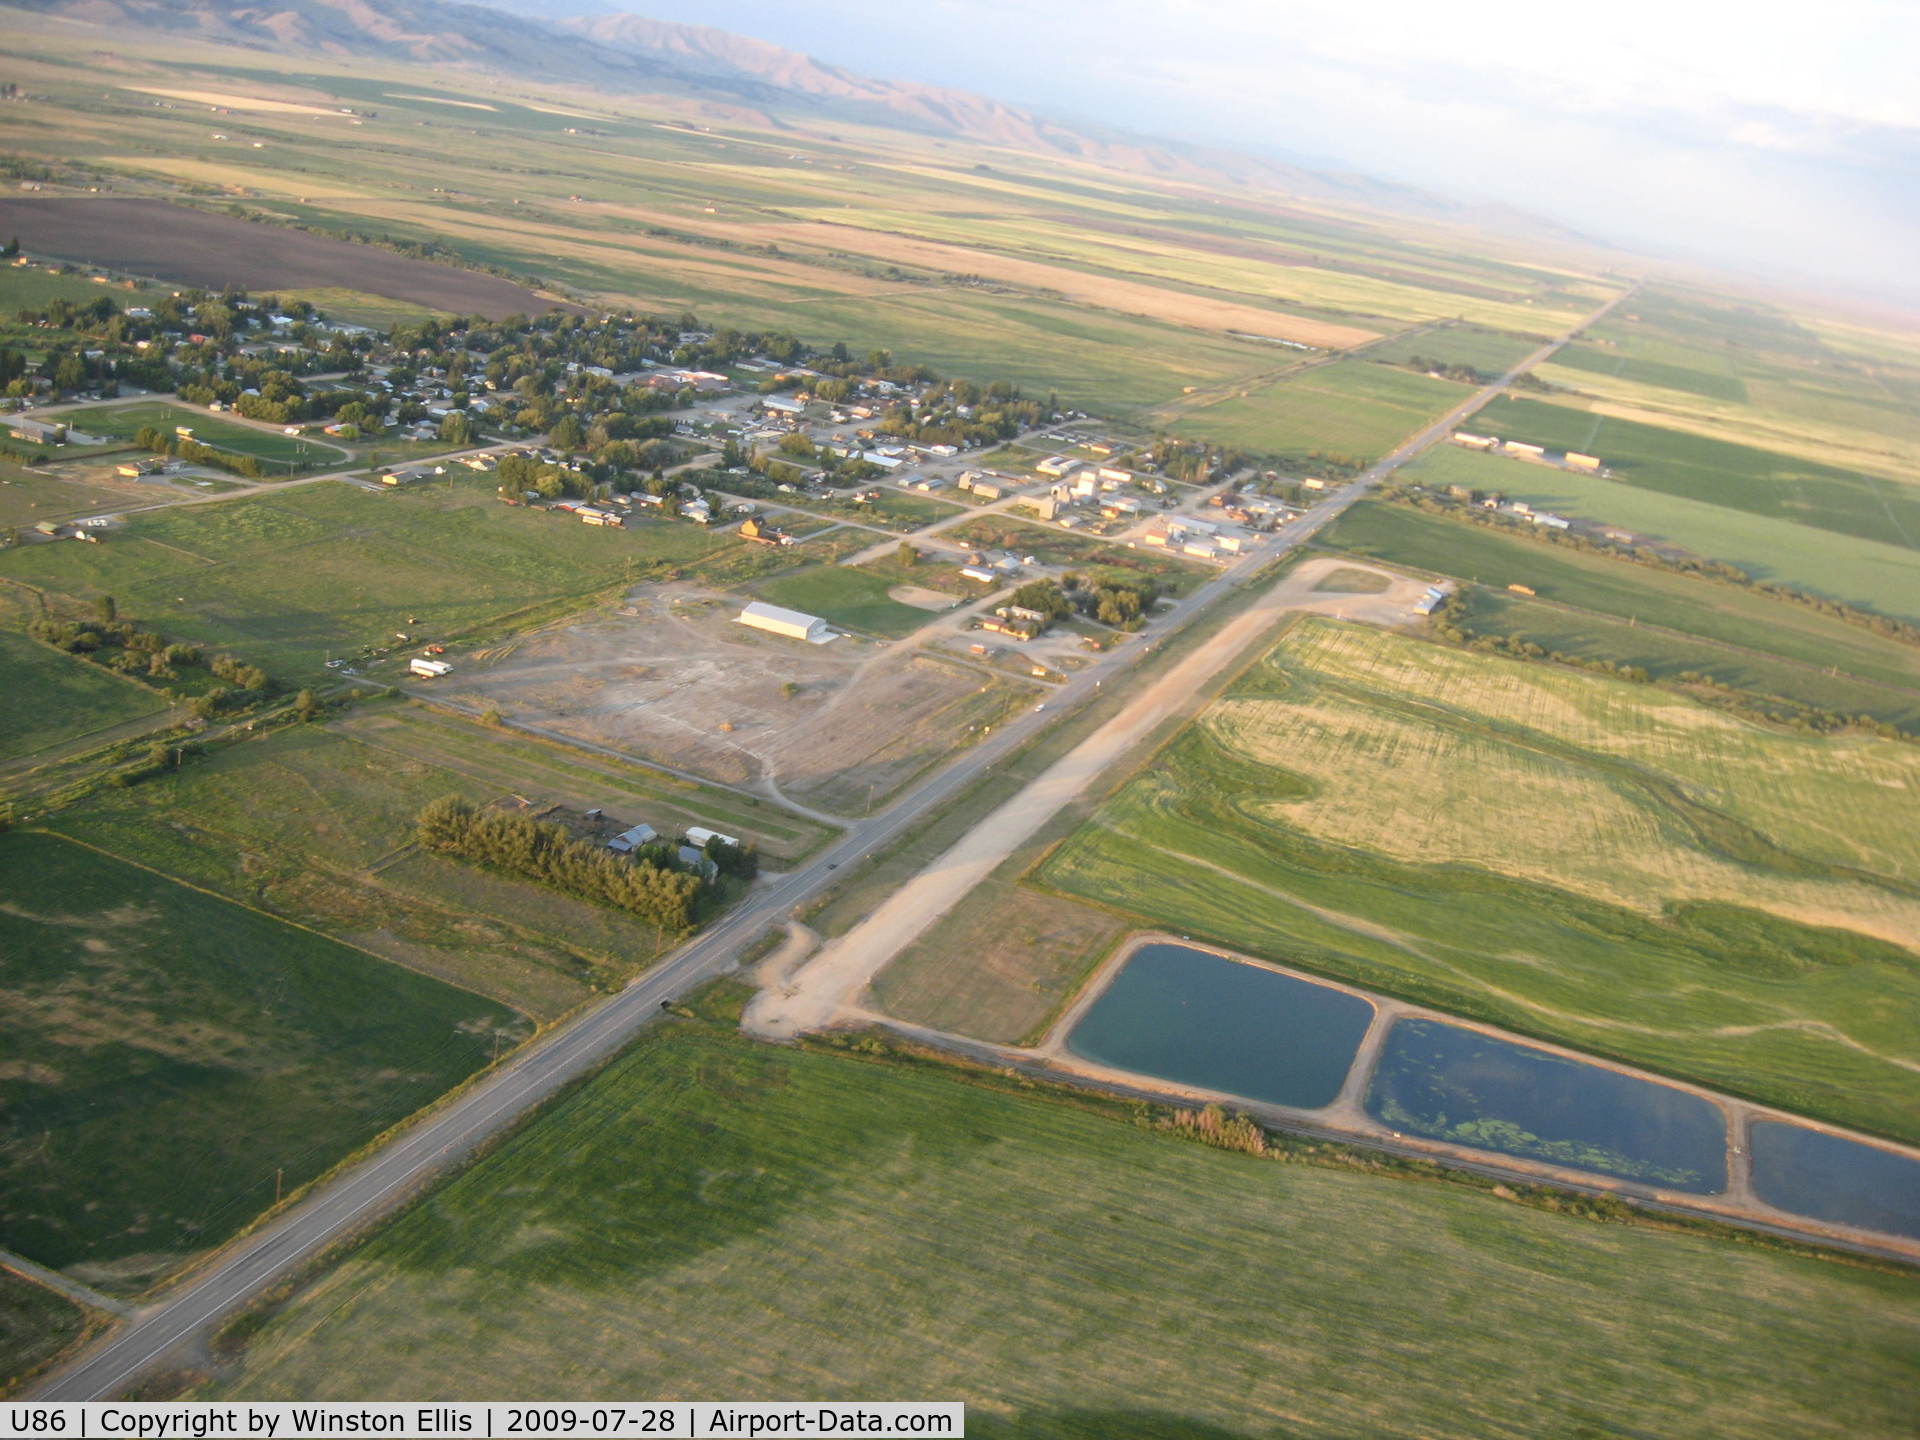 Camas County Airport (U86) - View from West